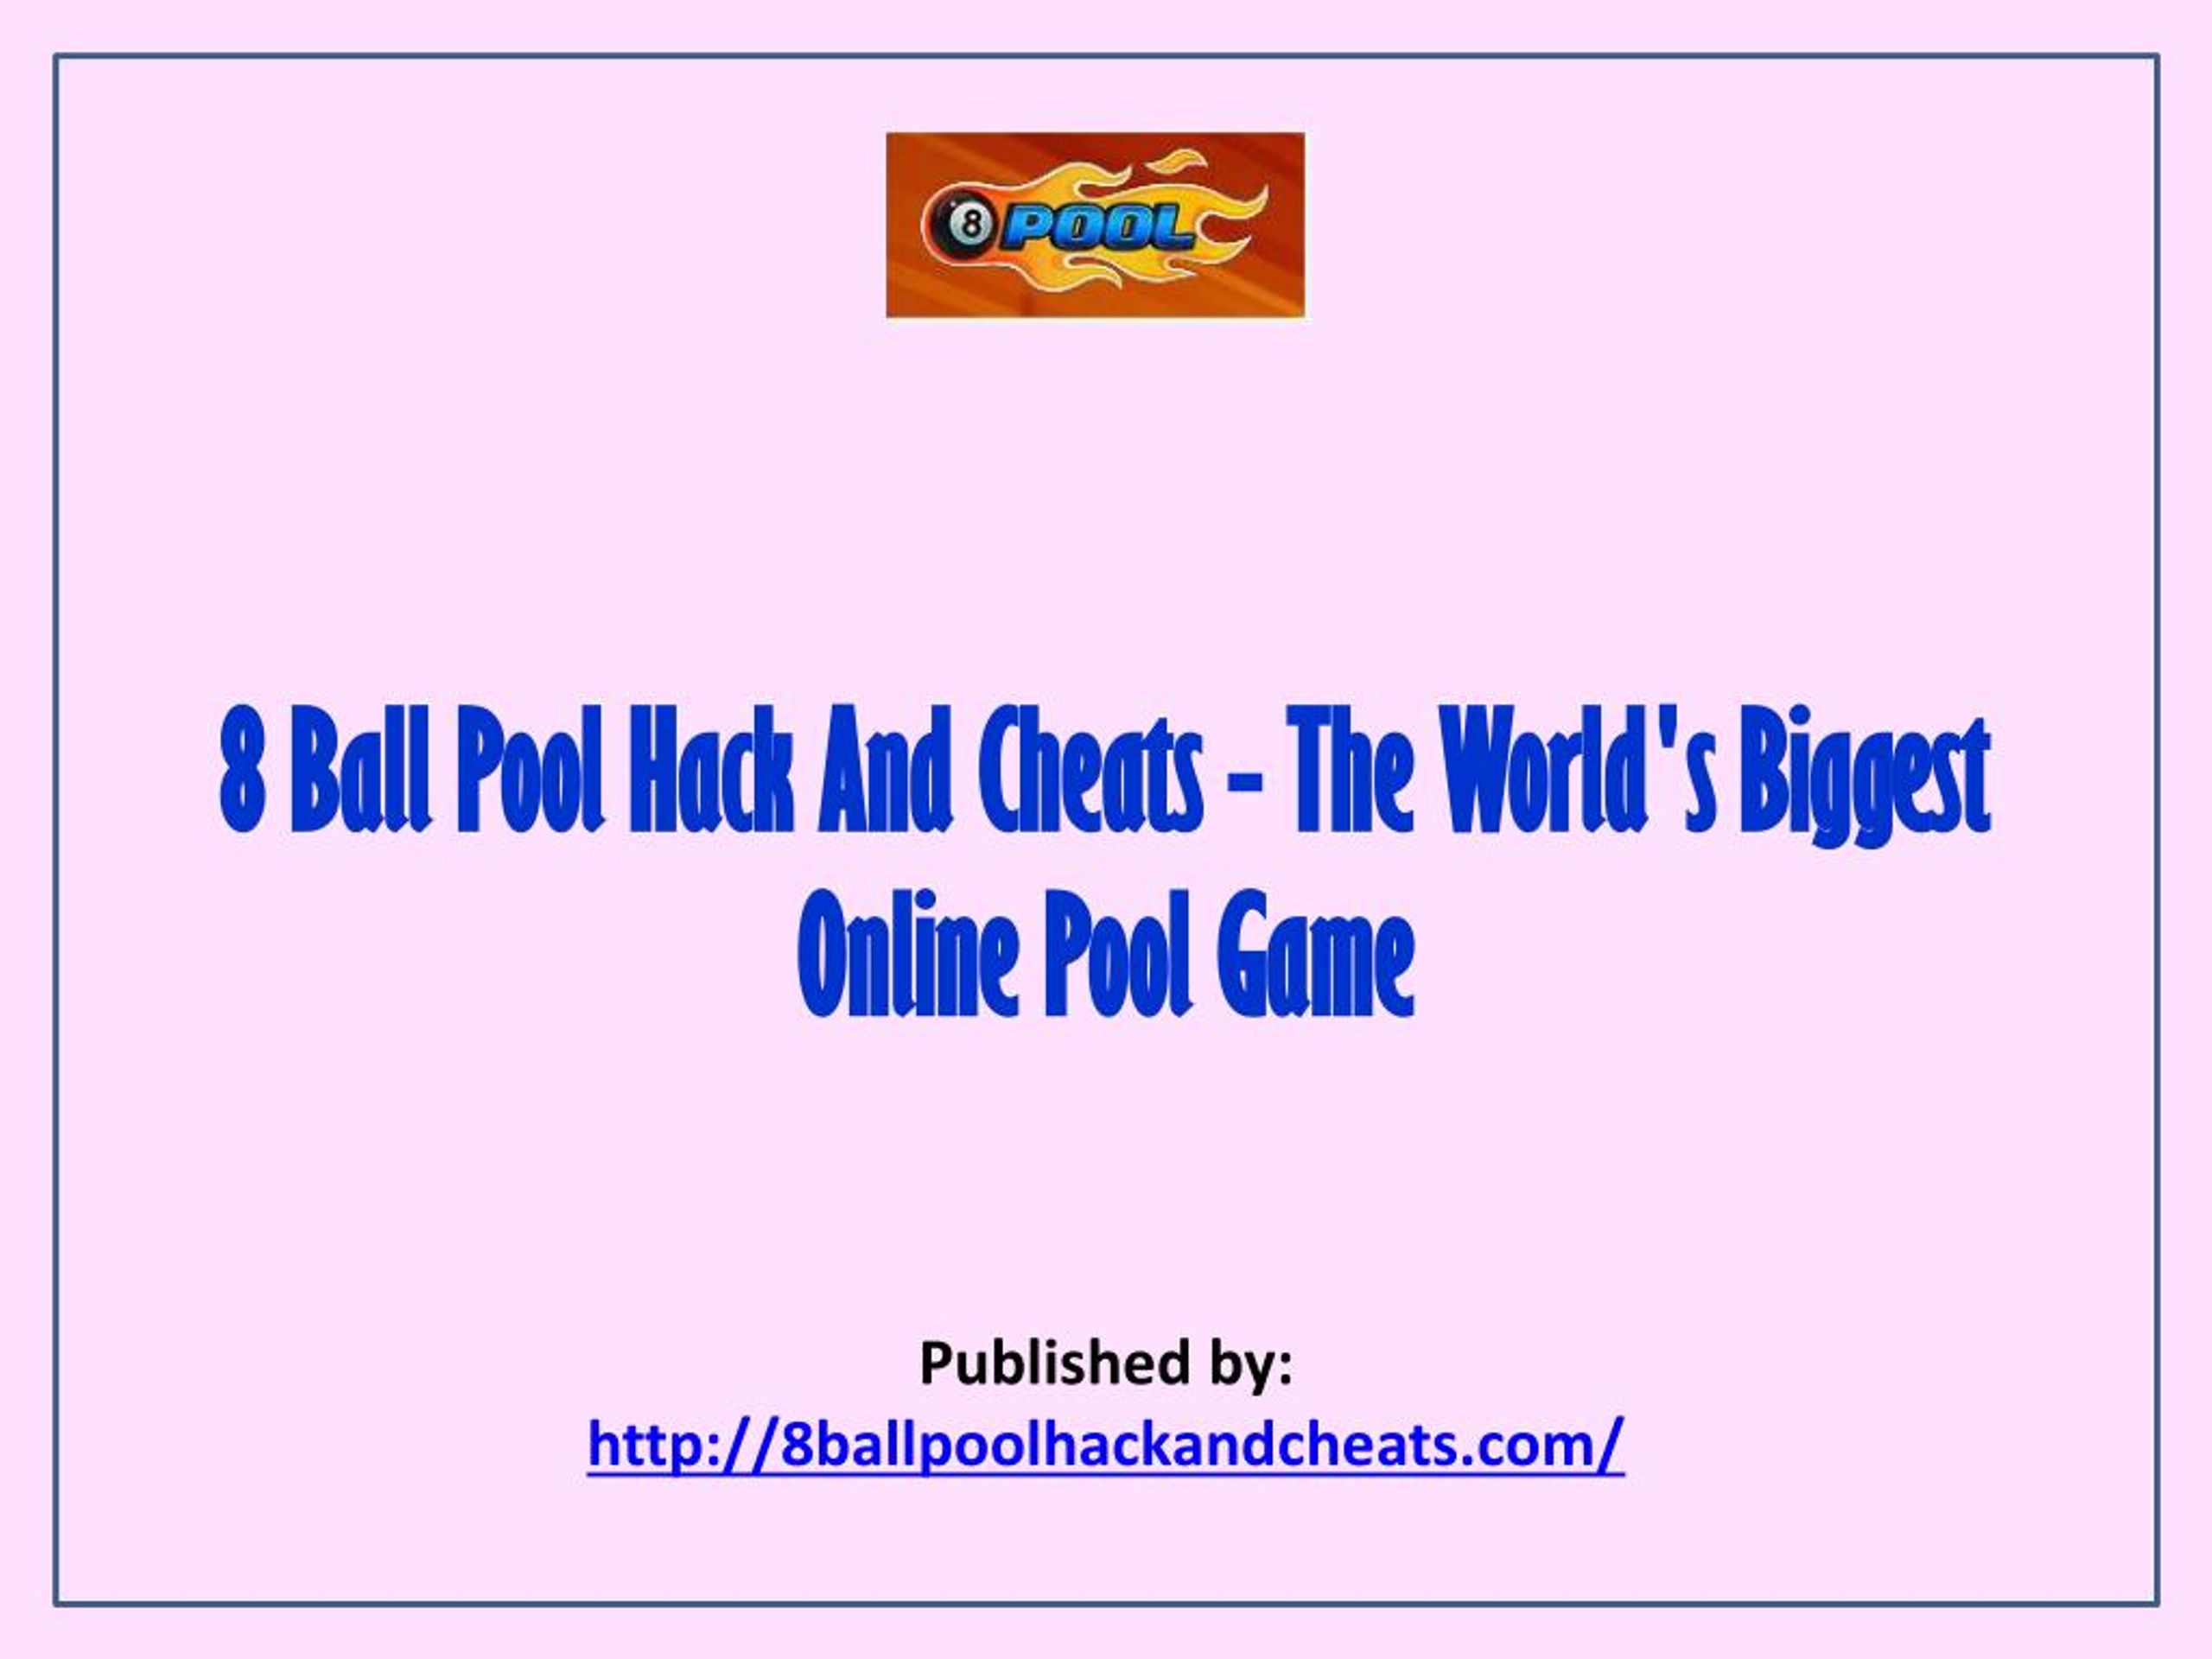 Ppt The World S Biggest Online Pool Game Powerpoint Presentation Free Download Id 7149565